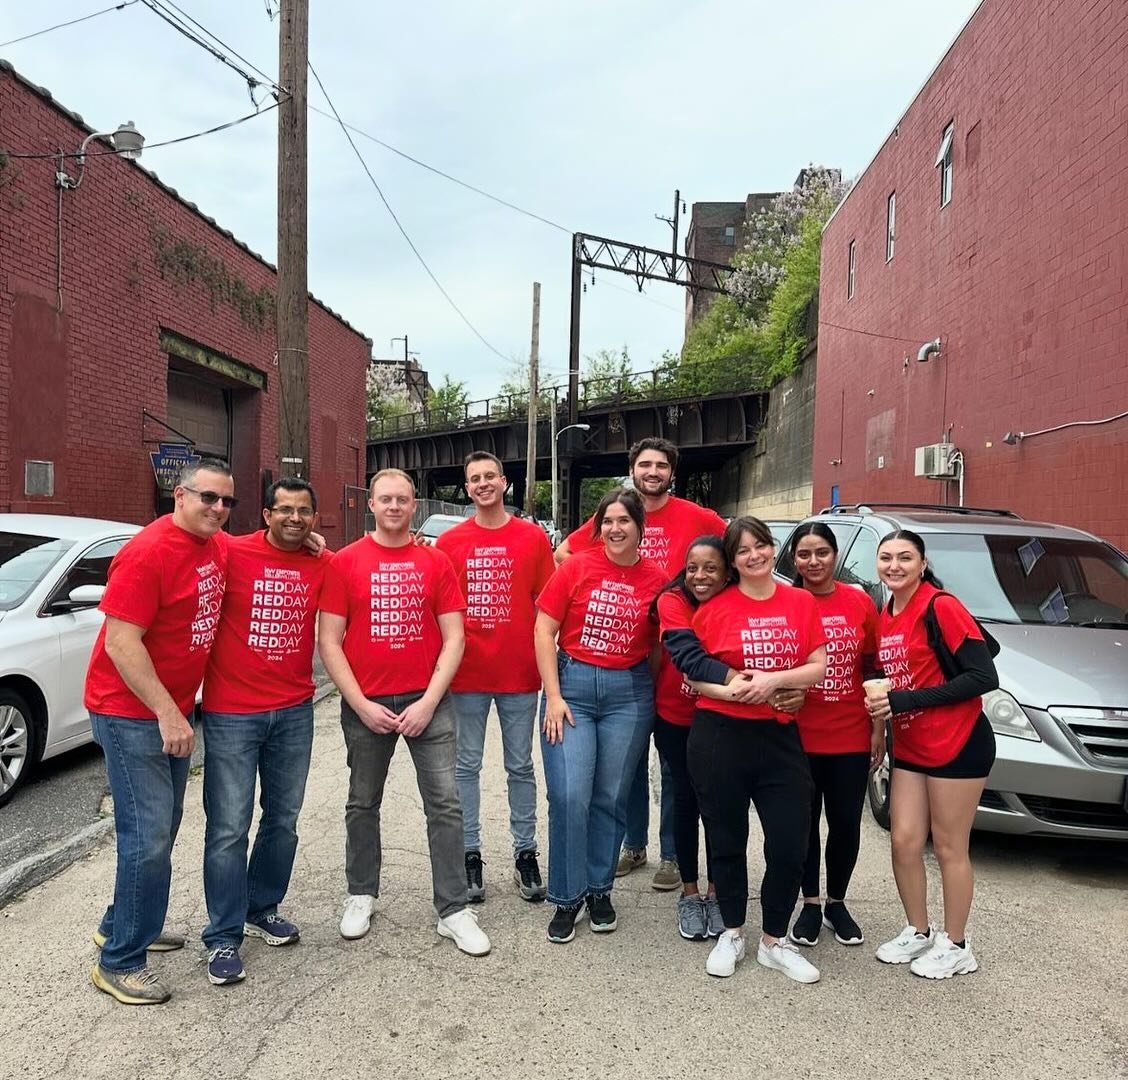 Thank you Keller Williams for painting the town teal at Red Day last week! @kw_philly sent over 50 volunteers across our 13 sites for a day of service on Thursday, and their accomplishments were incredible. Thank you!